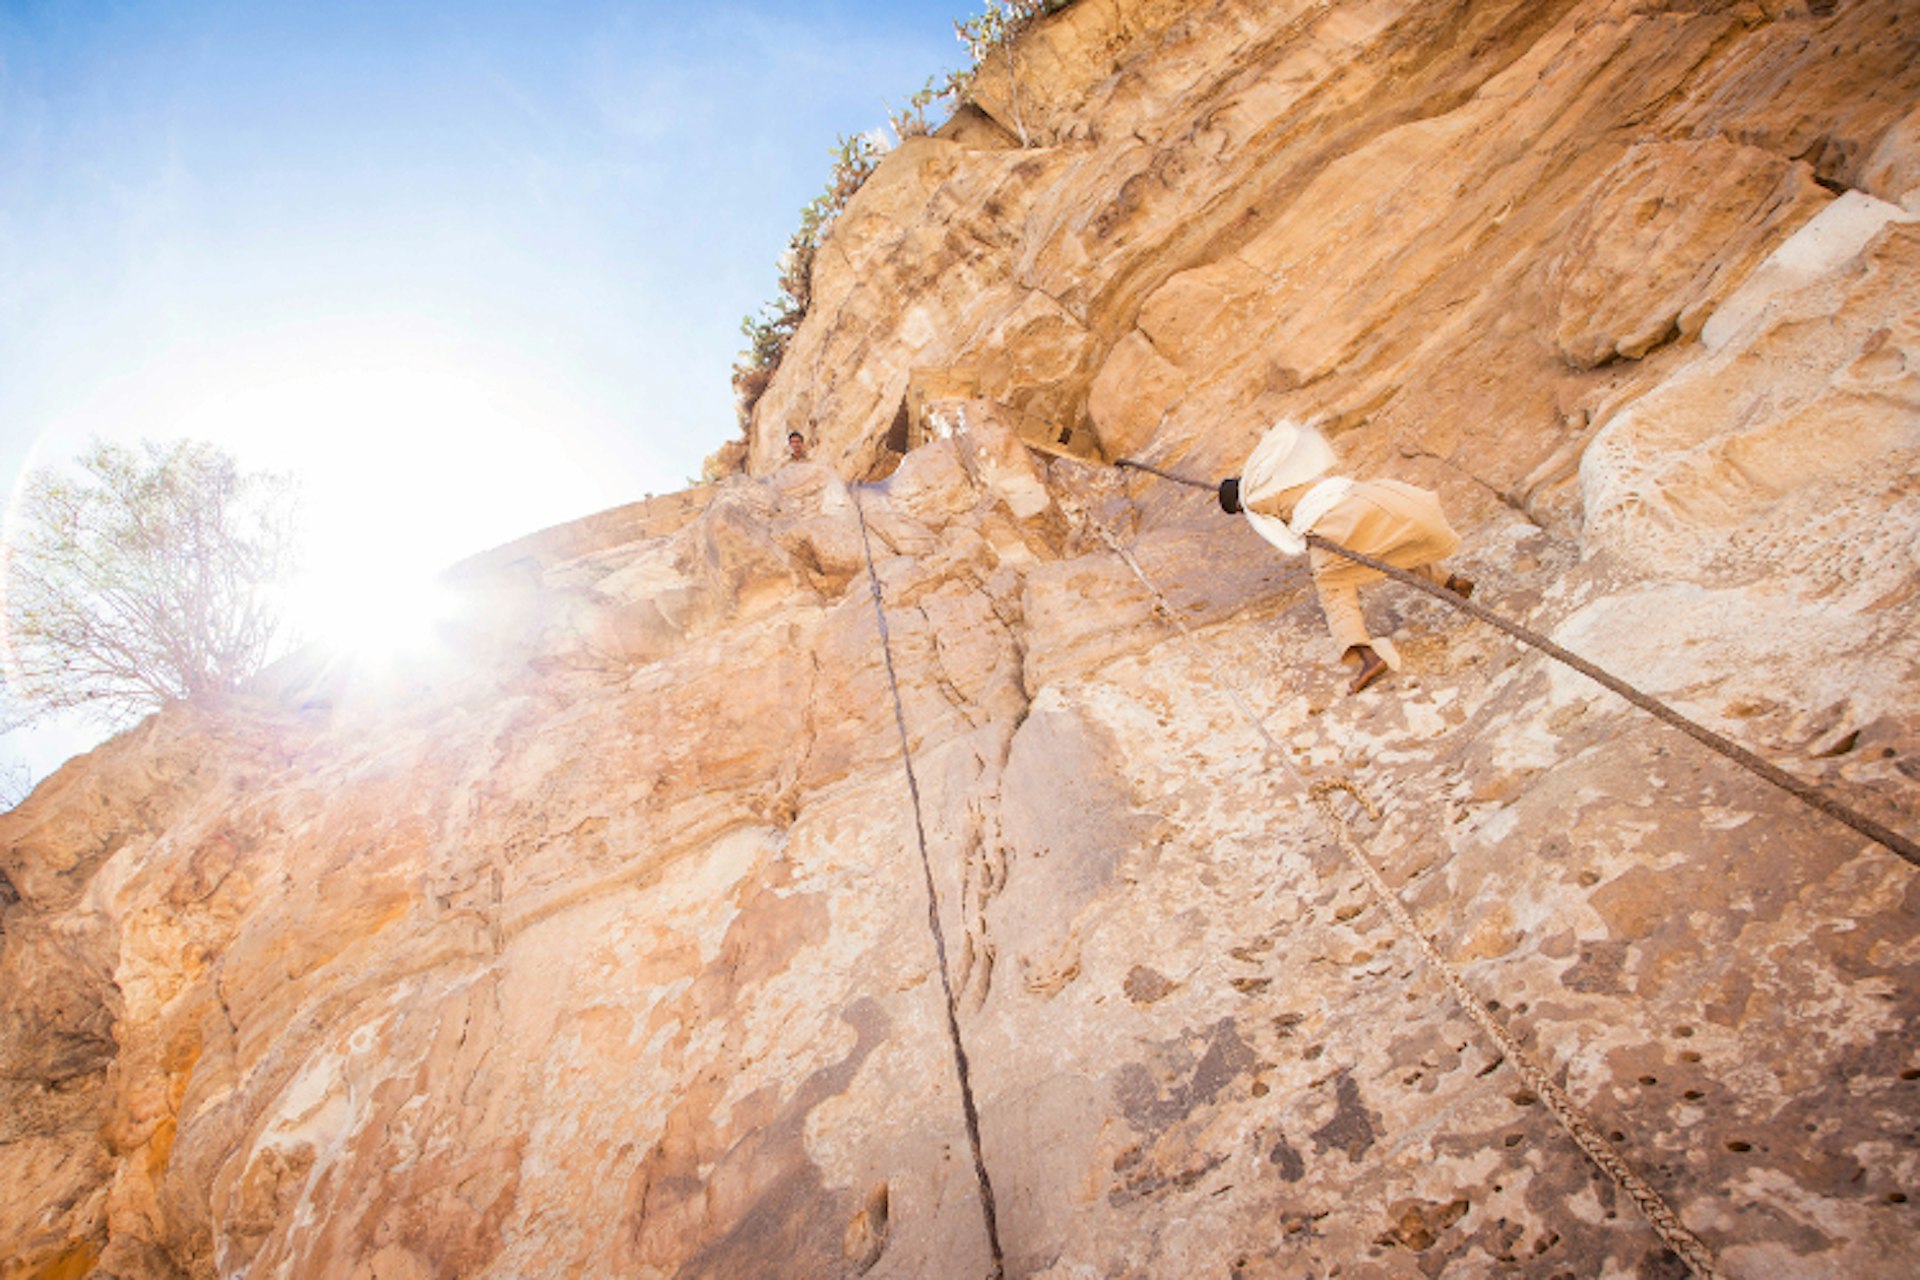 A monk climbs up to Debre Damo. Image by Philip Lee Harvey / Lonely Planet